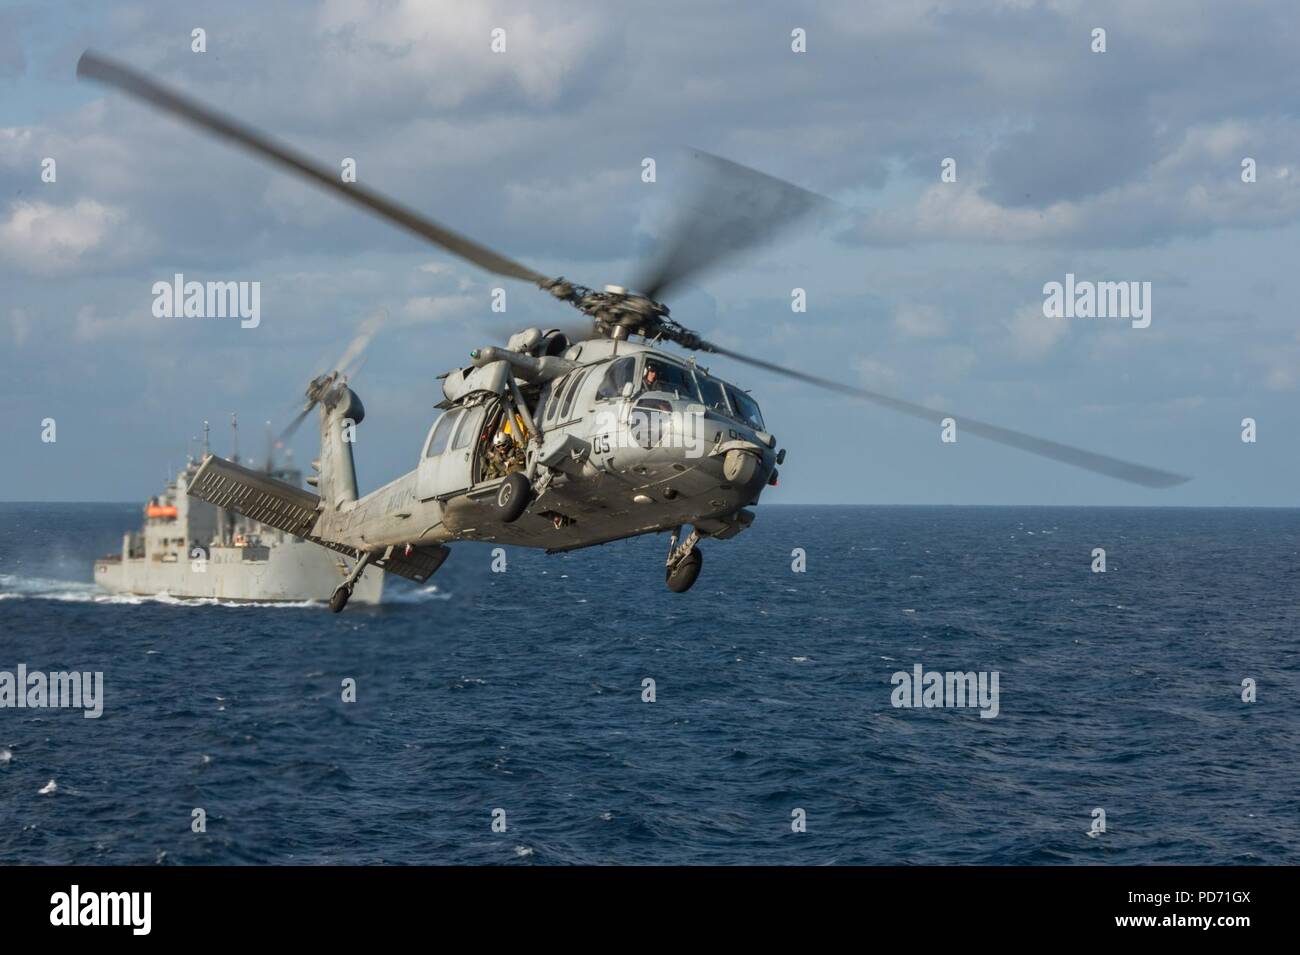 An MH-60S Sea Hawk helicopter assigned to Helicopter Sea Combat Squadron (HSC) 25 returns to the Military Sealift Command dry cargo and ammunition ship USNS Washington Chambers (T-AKE 11). Stock Photo